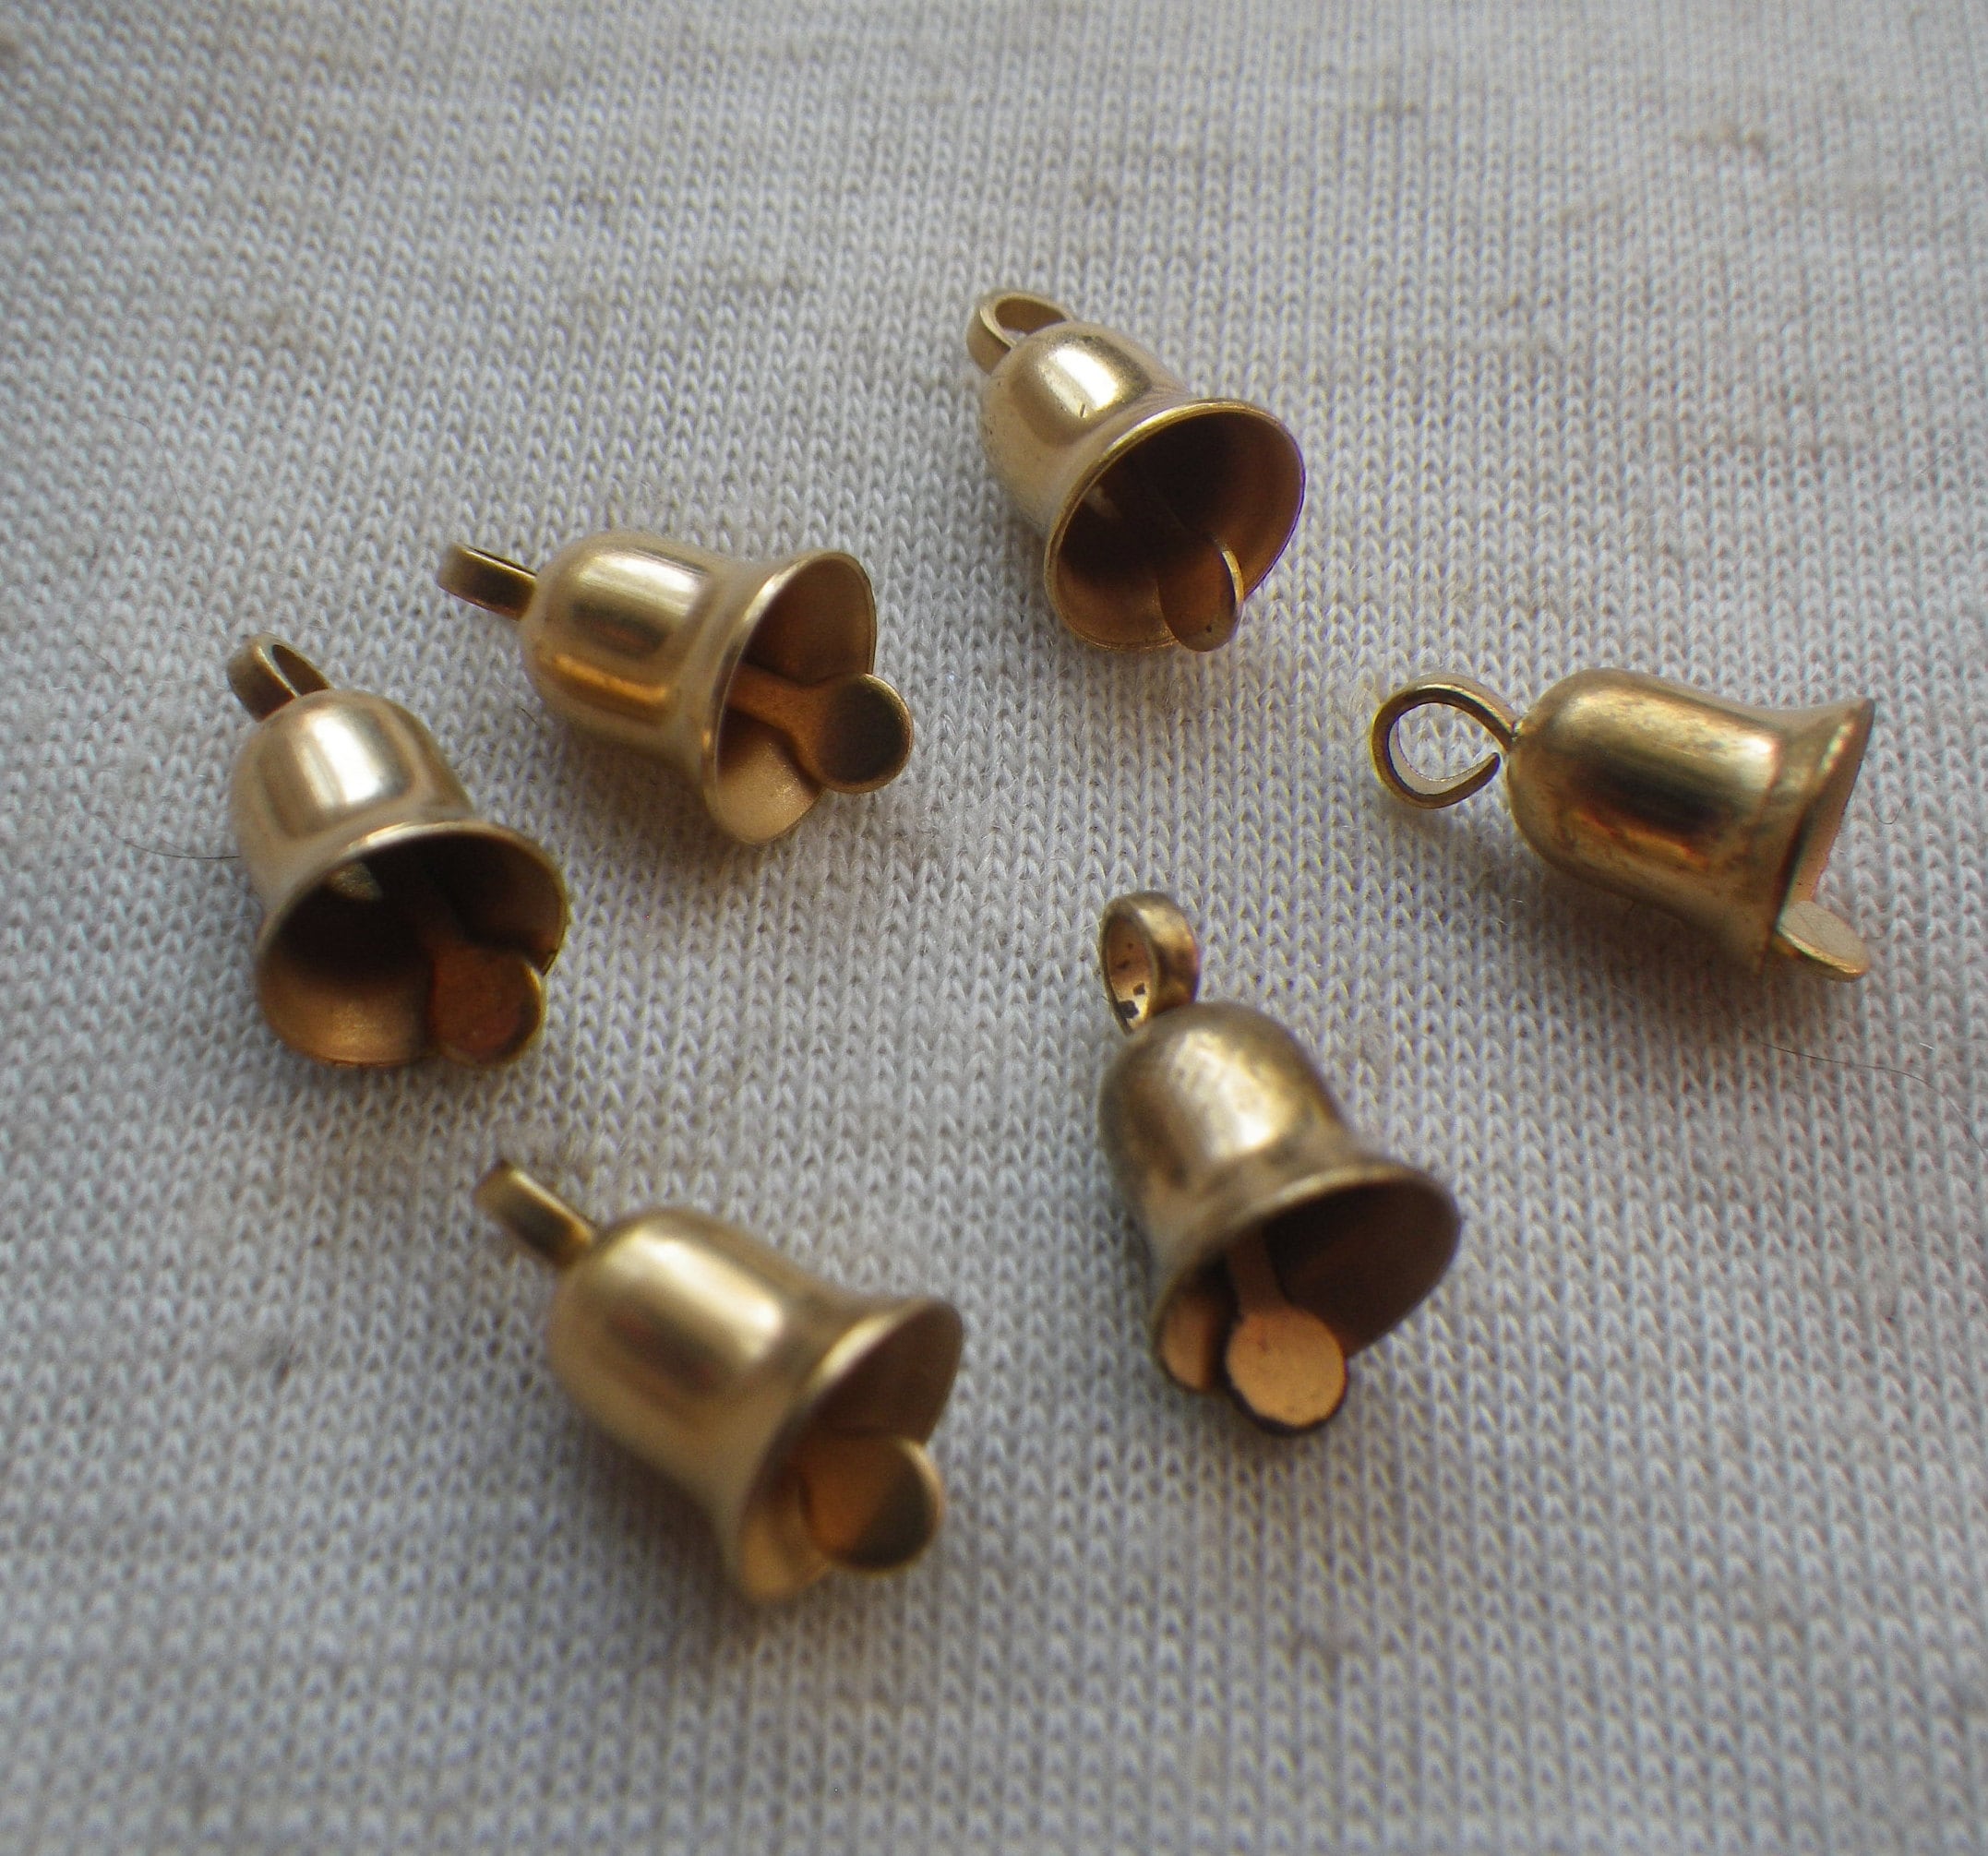 50pcs Small Bells Diy Mini Tiny Iron Jingle Bells With Hole For Craft  Jewelry Festival Birthday Decorationgold